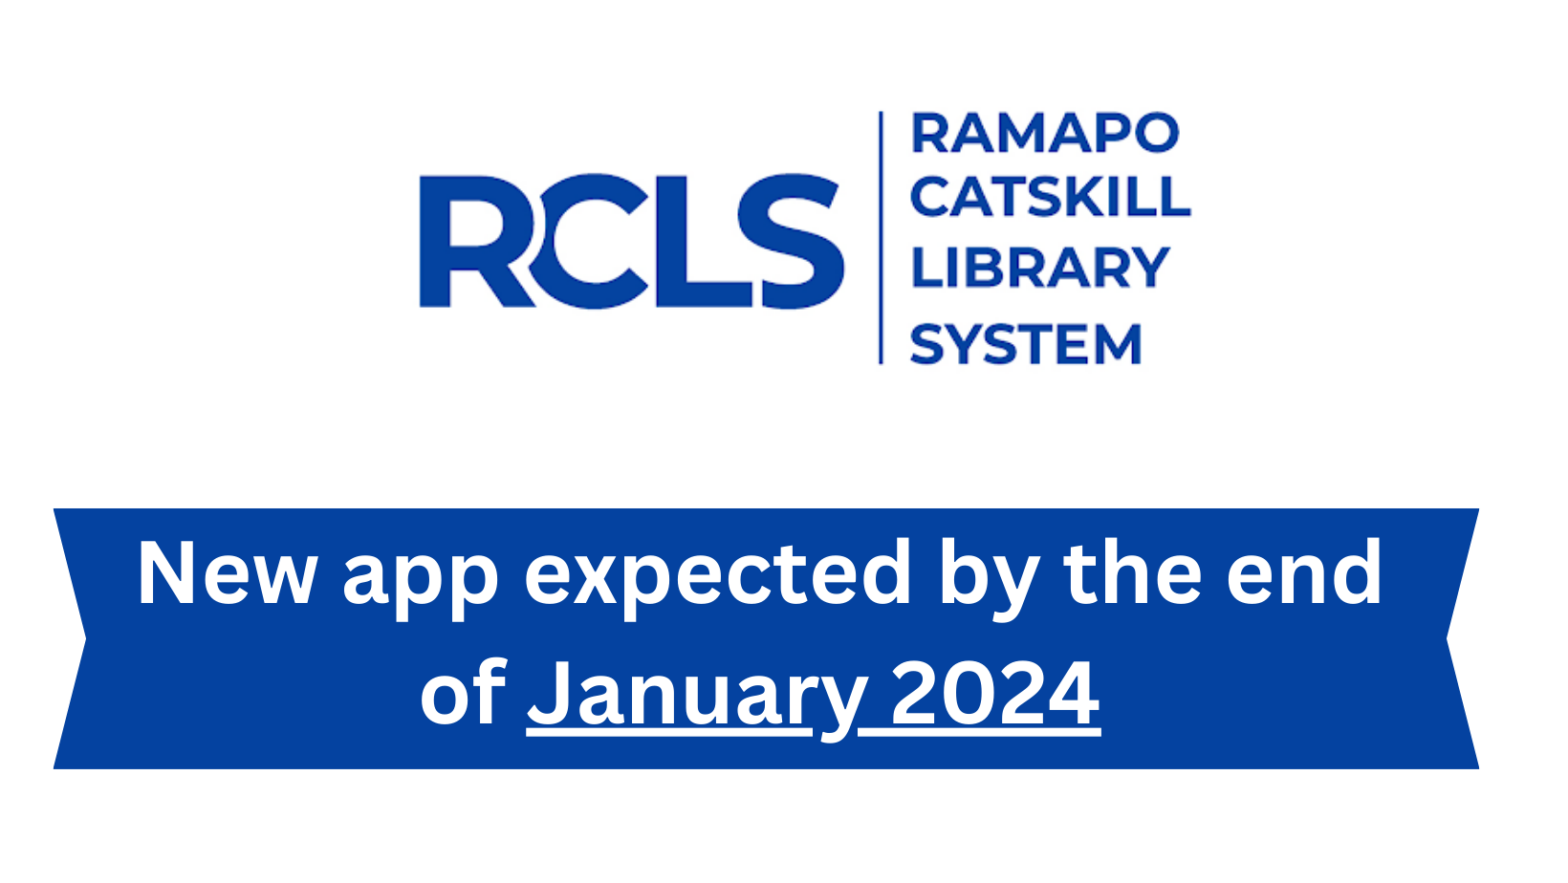 The RCLS Gateway App has been discontinued.